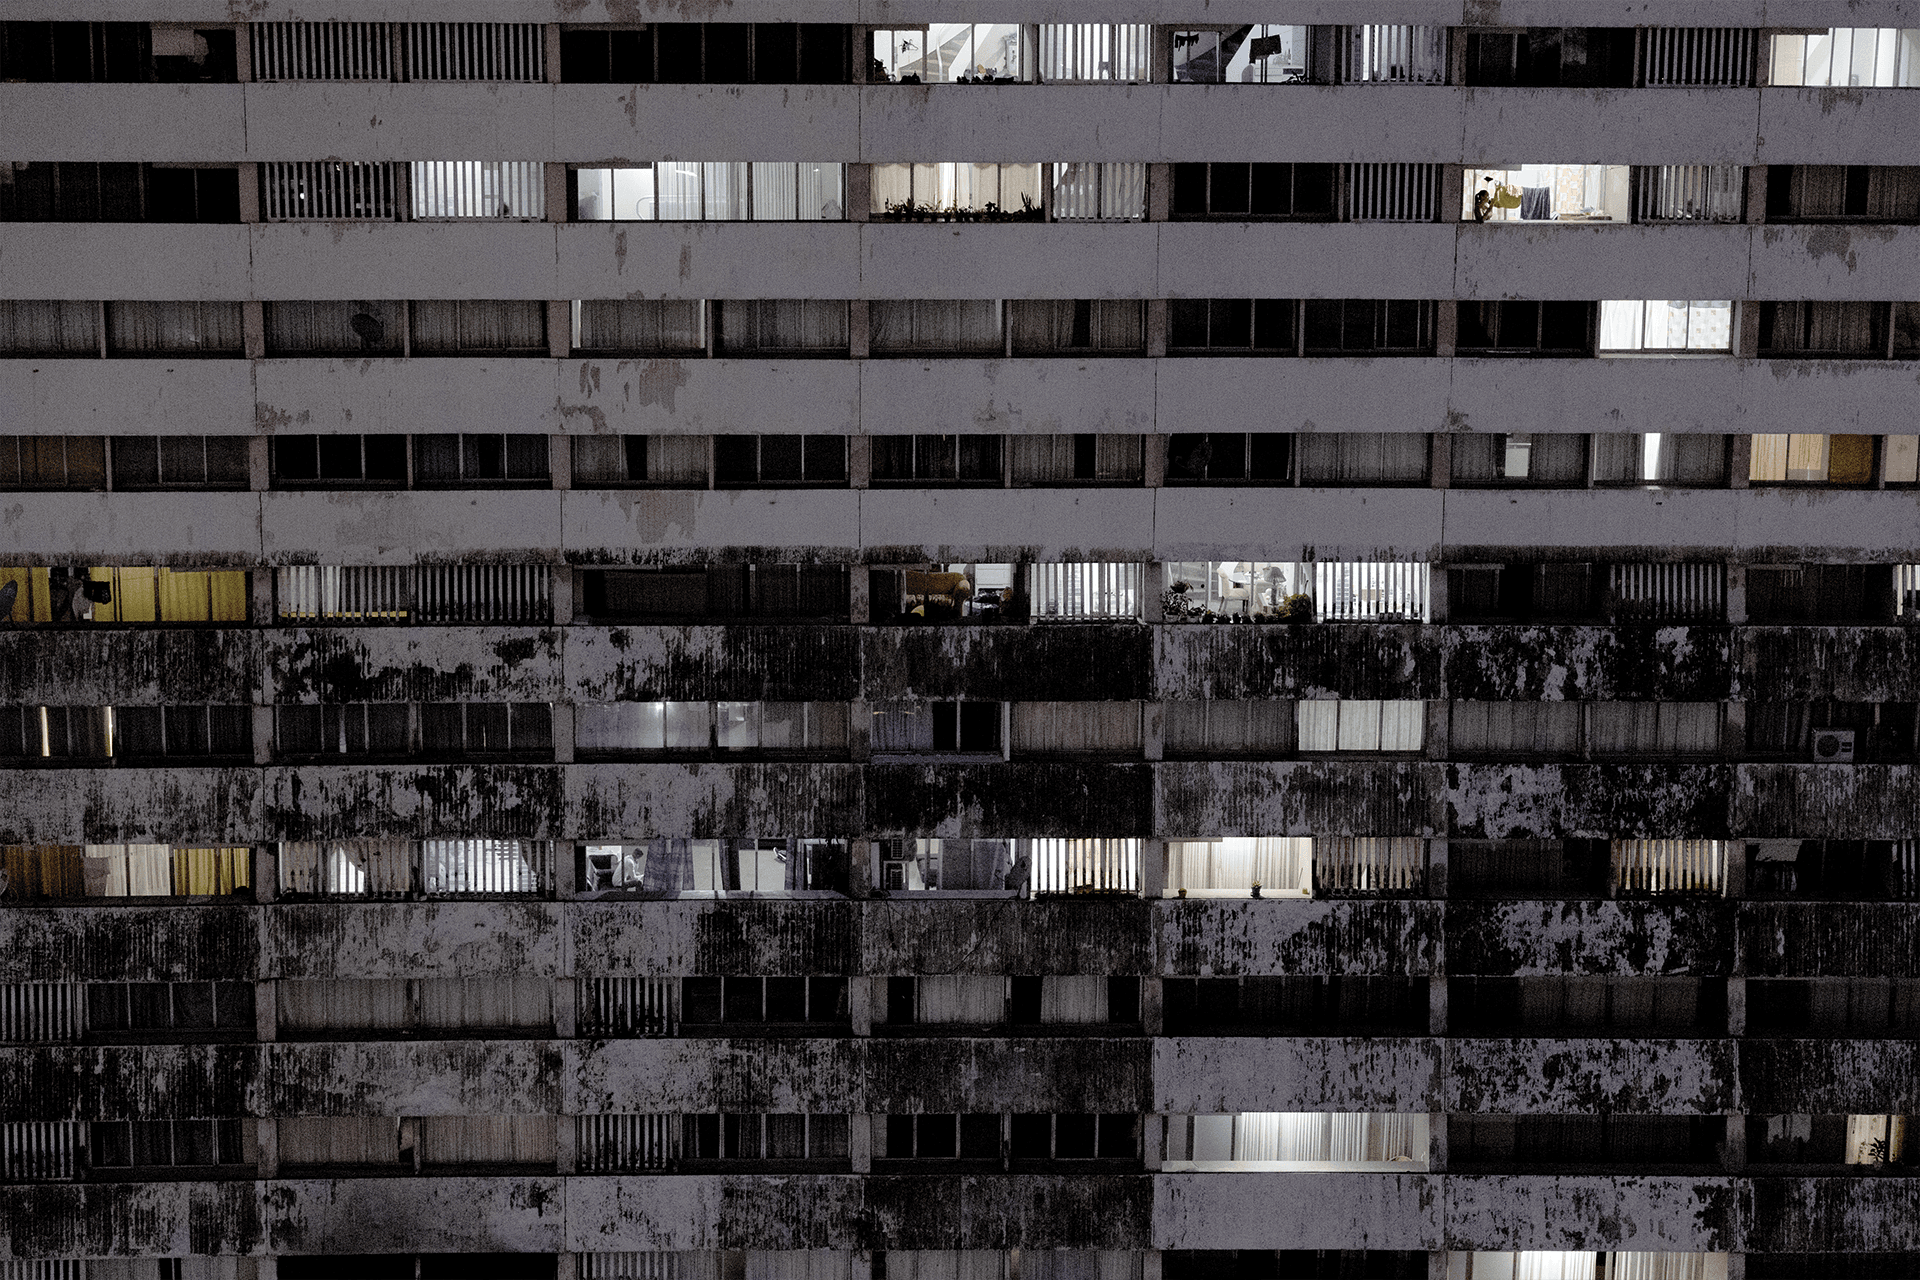 Windows from a building in Parque Central, a famous middle-class complex built in the 70’s that was once considered the most important urban development in Latin America.